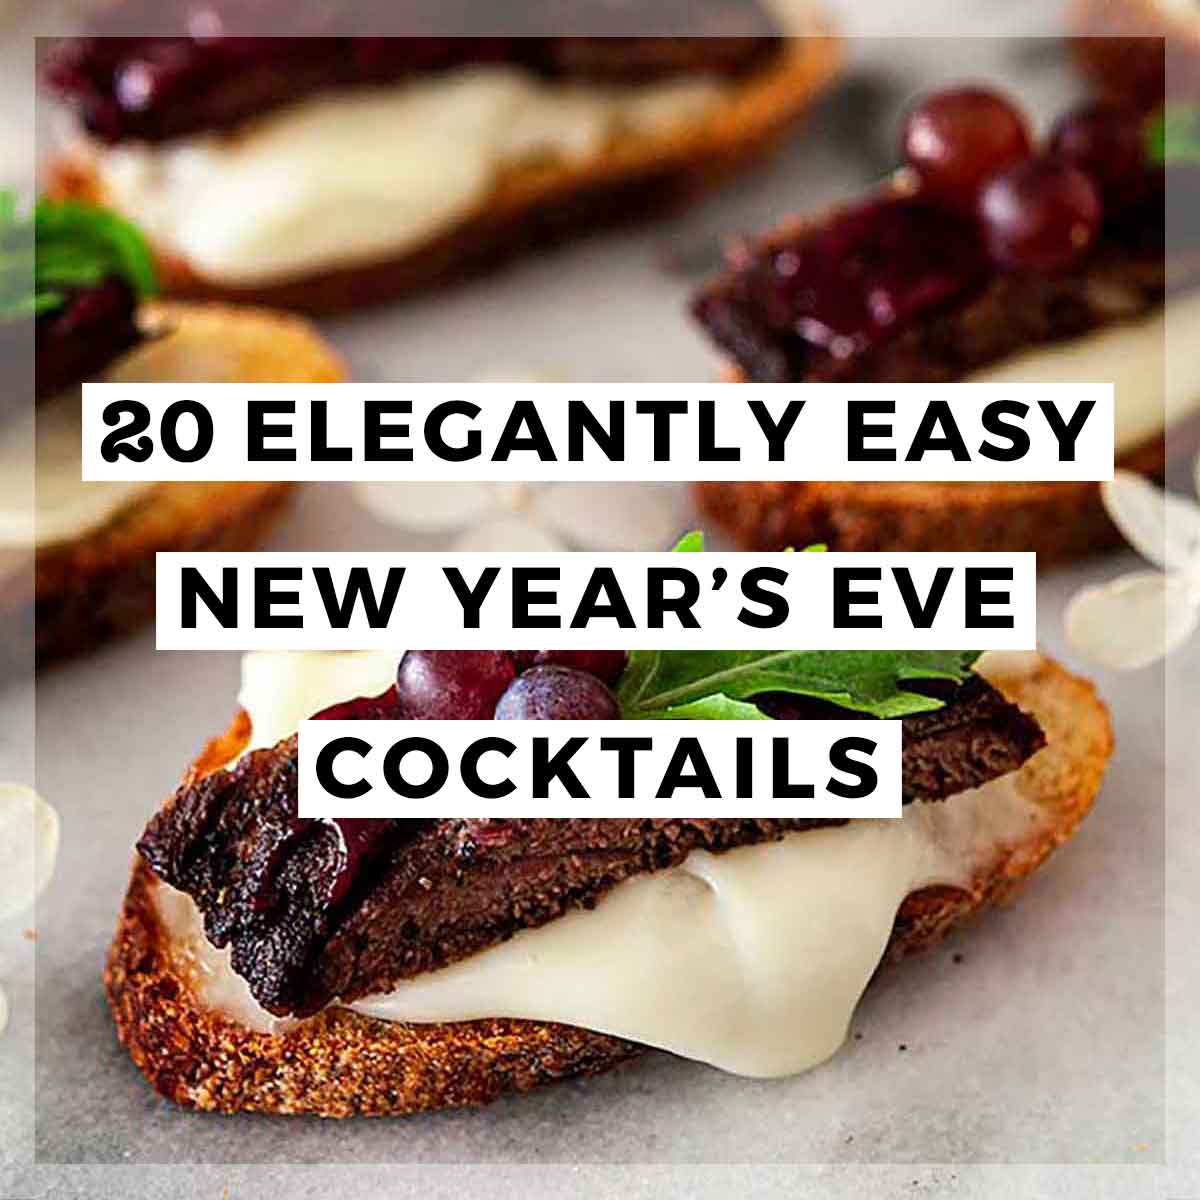 A steak canapé with a title that says "20 Elegantly Easy New Year's Even Appetizers."